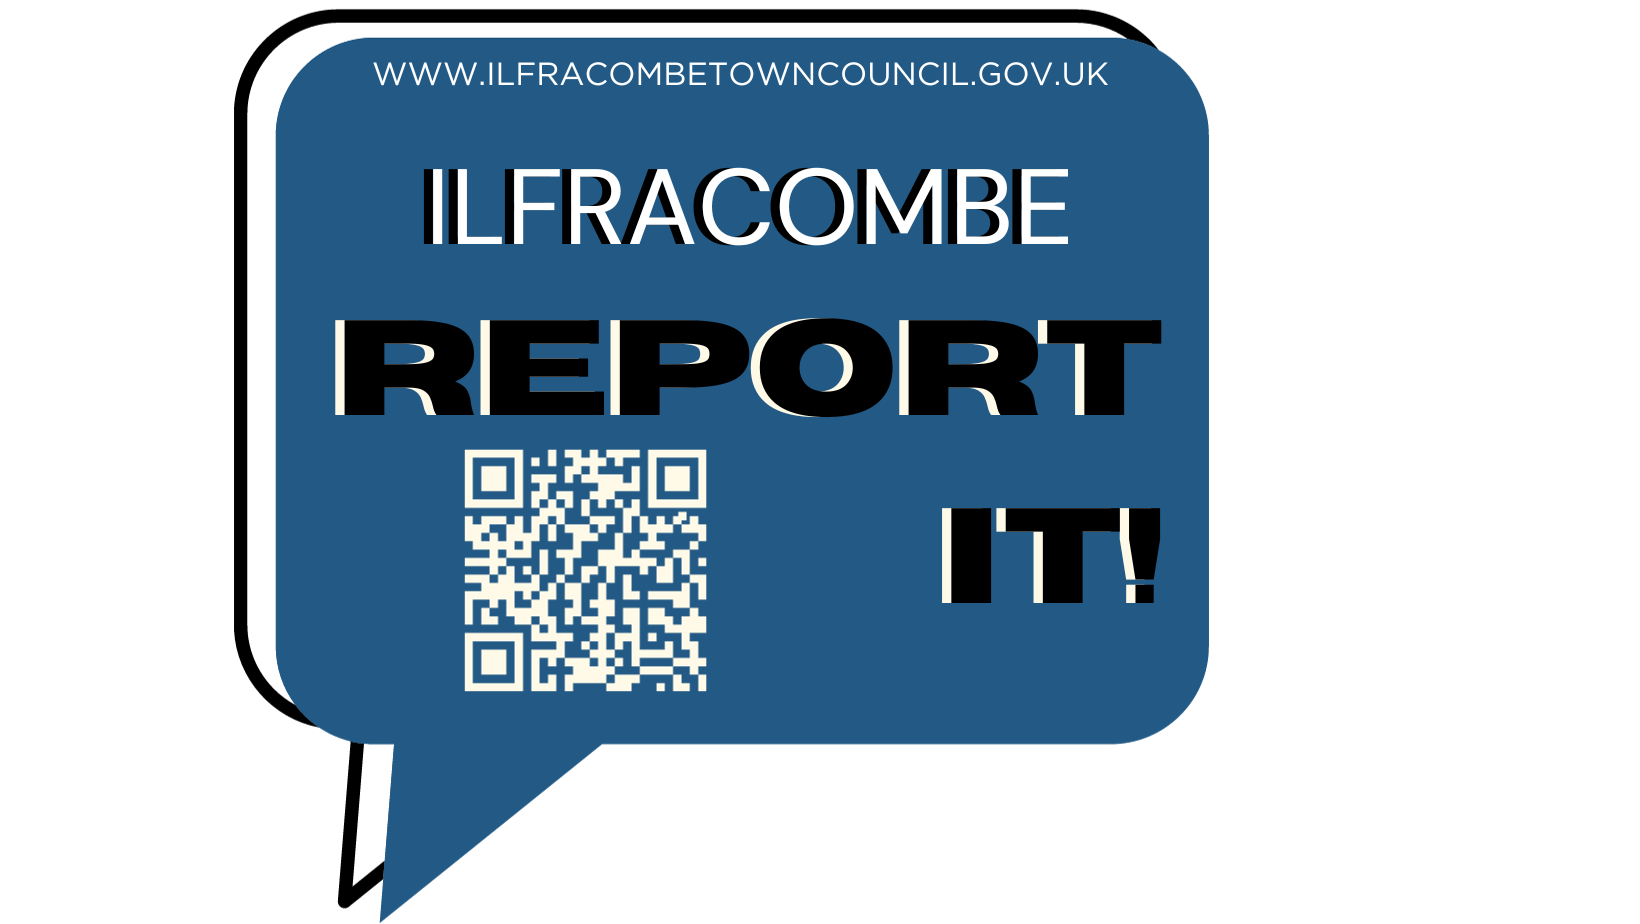 Ilfracombe Report it logo Featuring a speech bubble encouraging people to officially report issues.